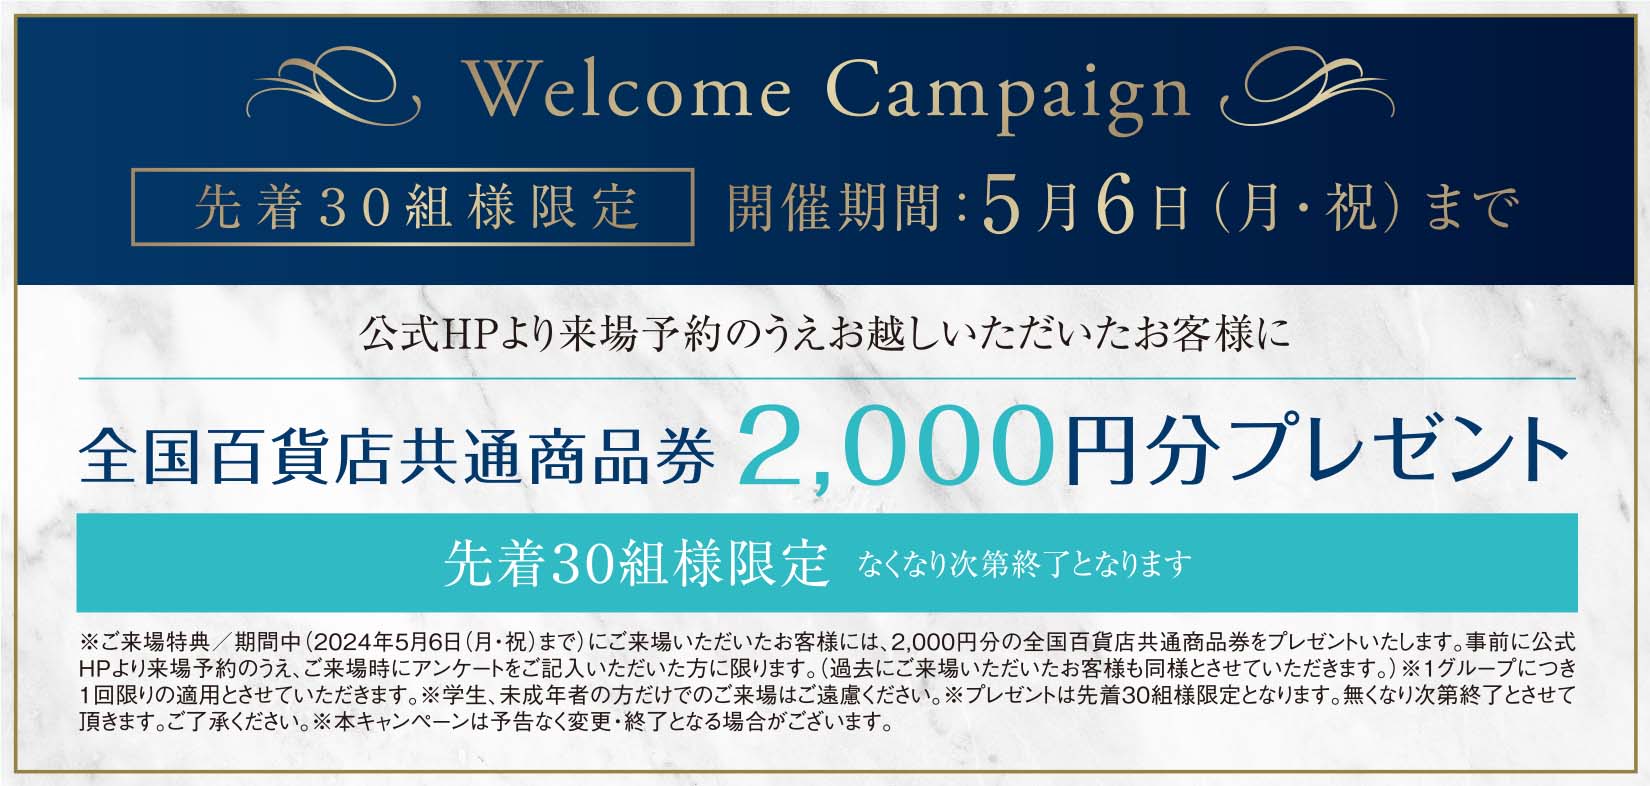 Welcome Campaign 先着30組様限定 開催期間：5月6日(月・祝)まで